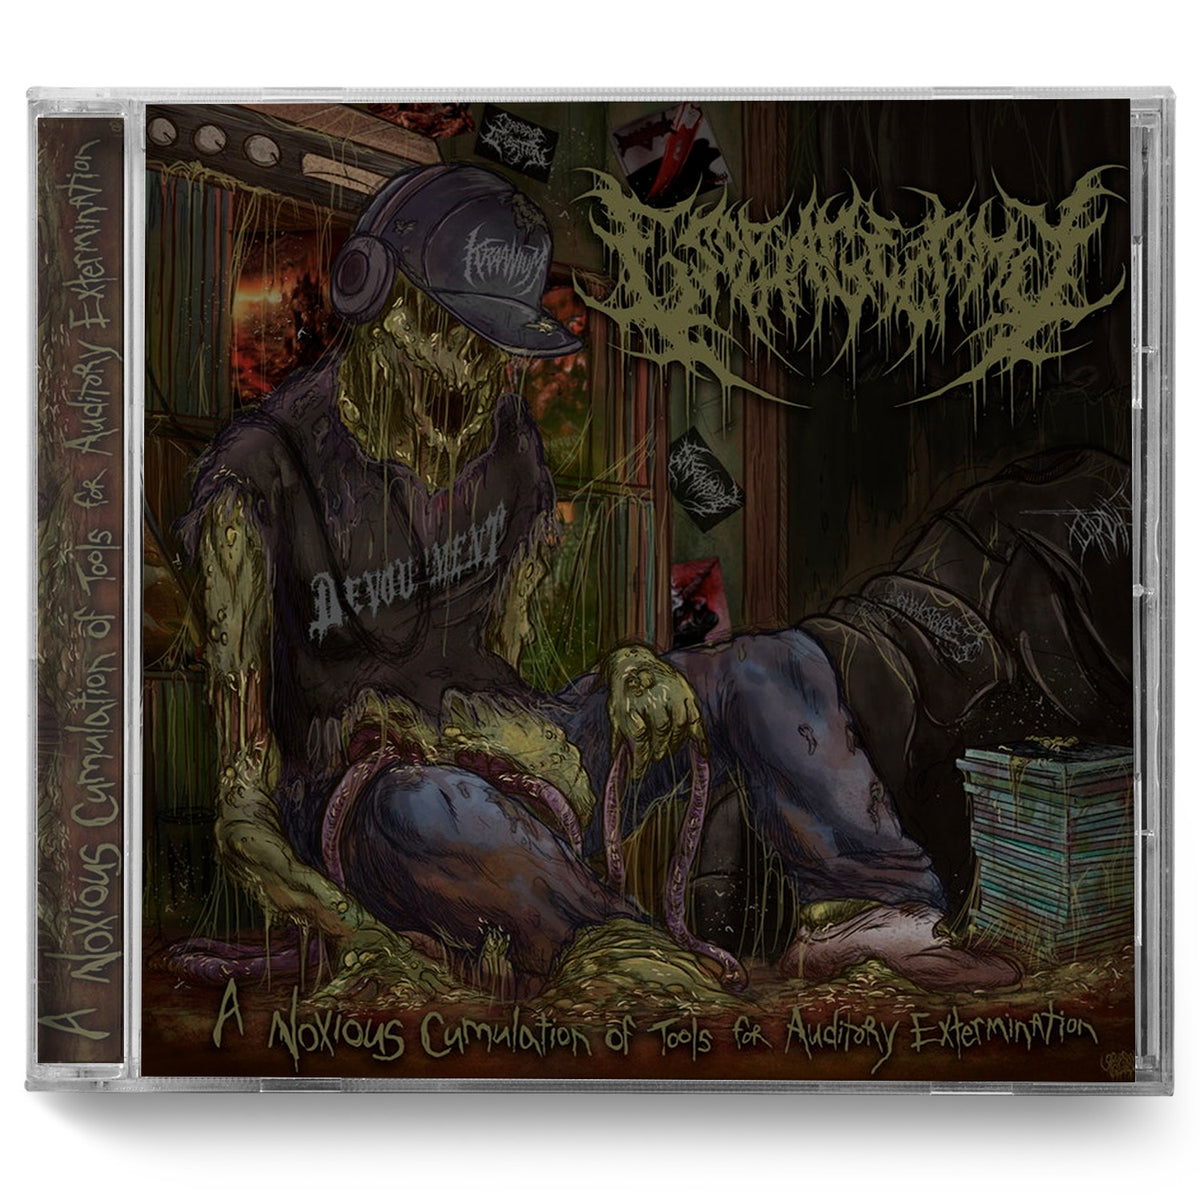 Esophagectomy "A Noxious Cumulation of Tools for Auditory Extermination" CD - Miasma Records